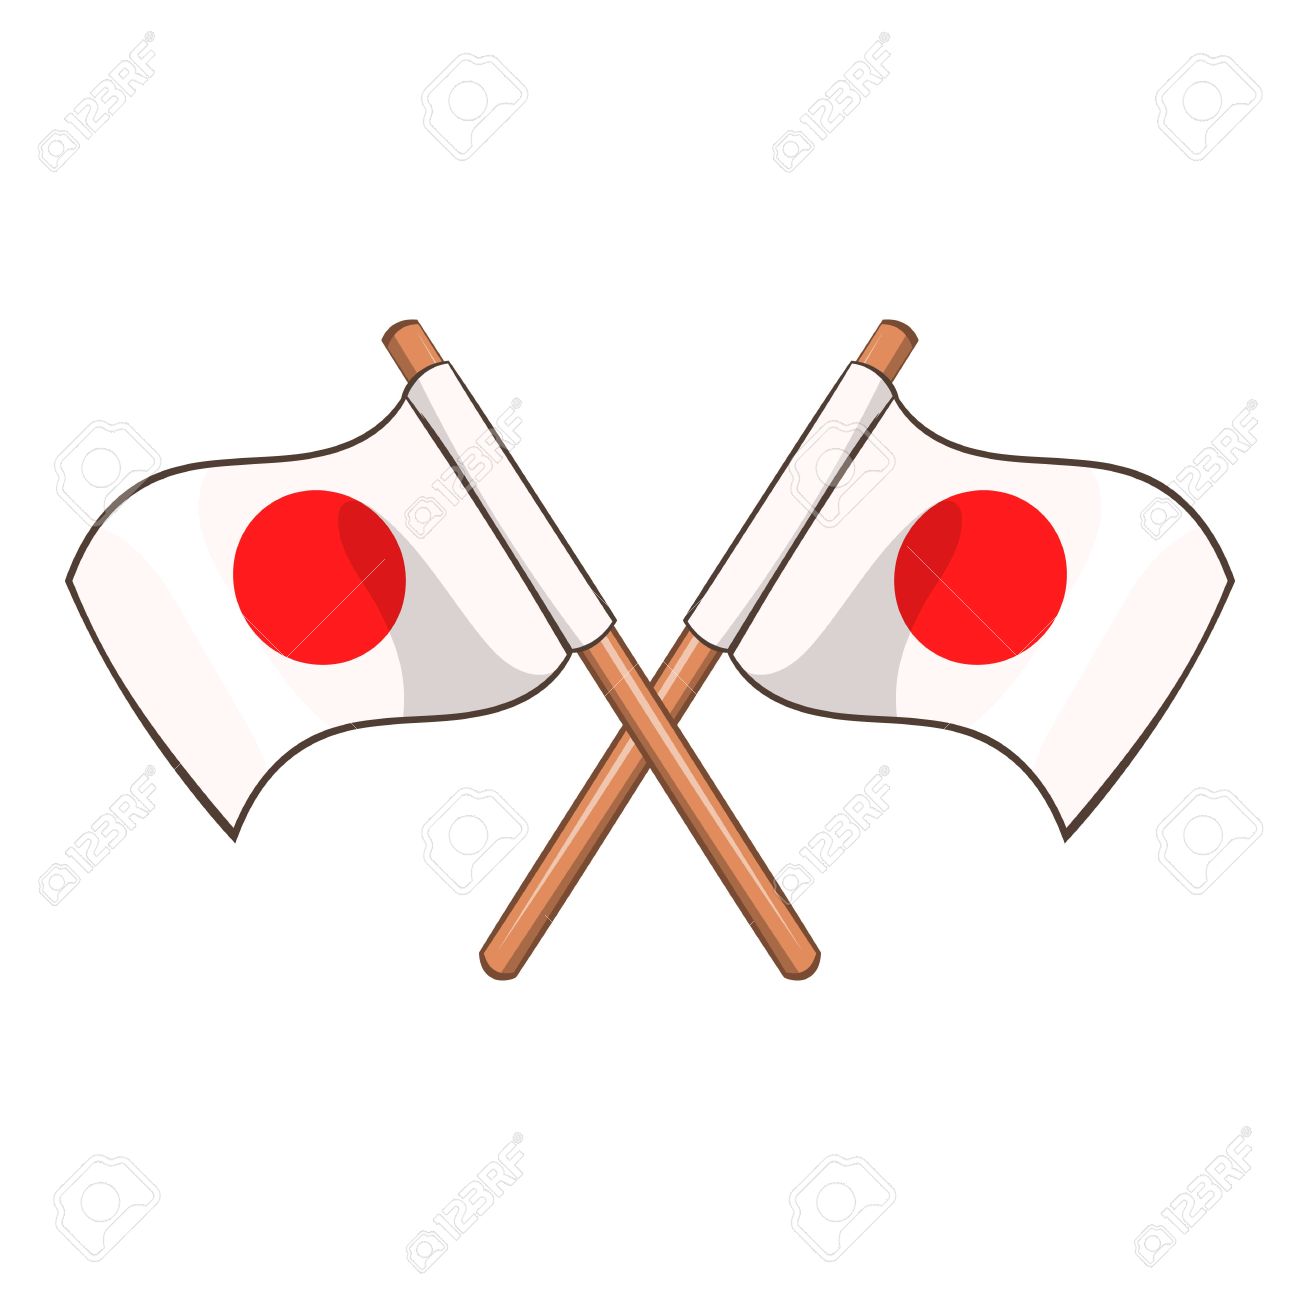 Glossy round icon. Illustration of flag of Japan